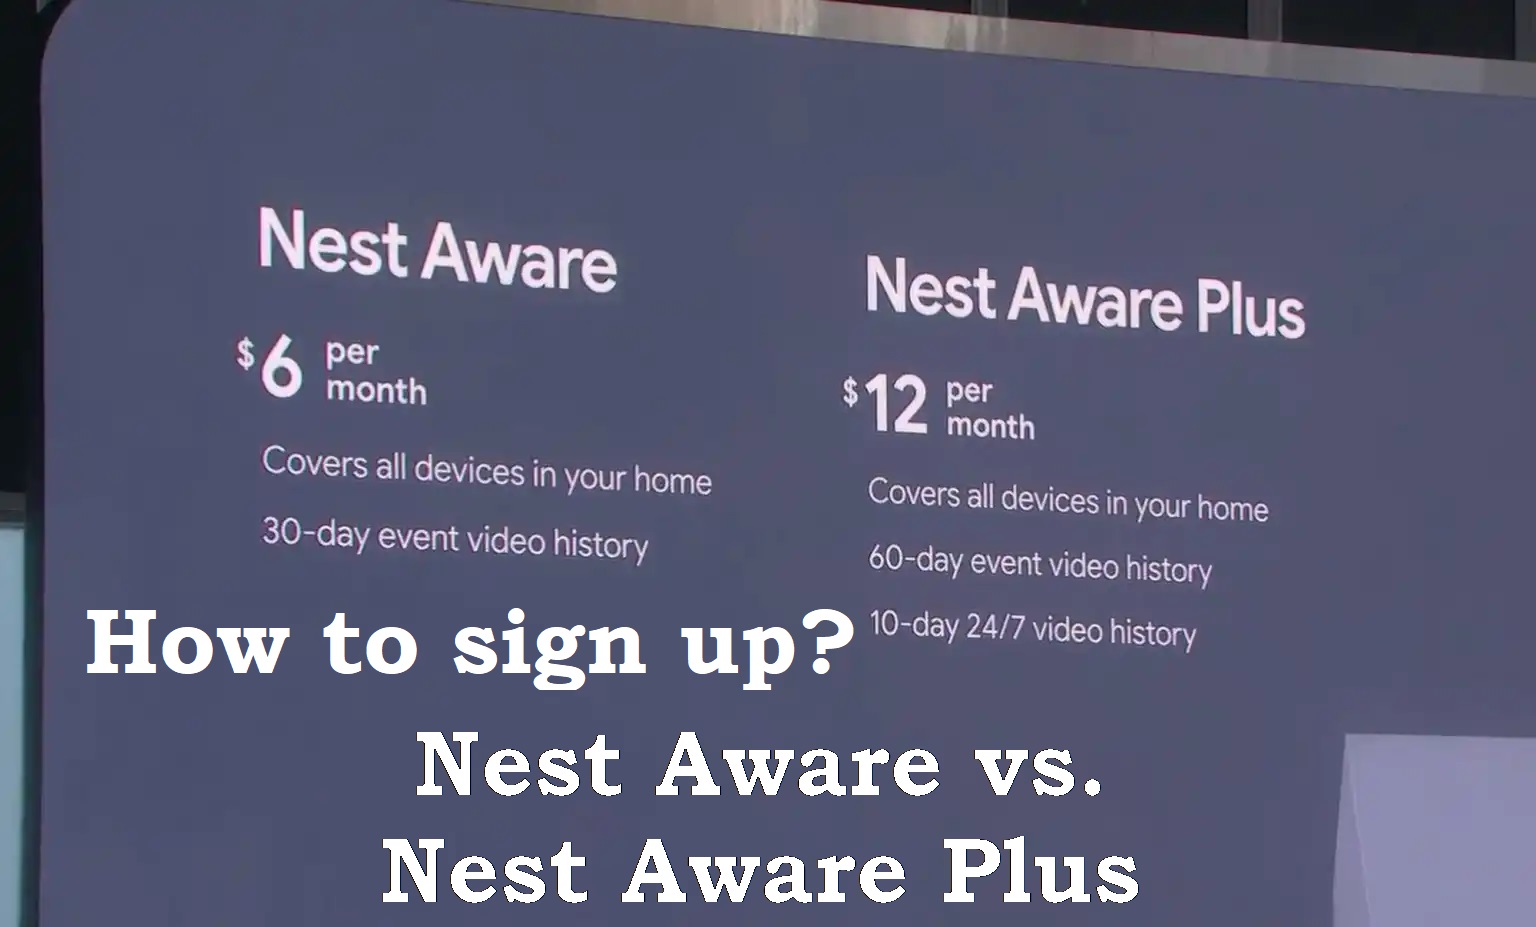 You are currently viewing Nest Aware vs. Nest Aware Plus: how to sign up?